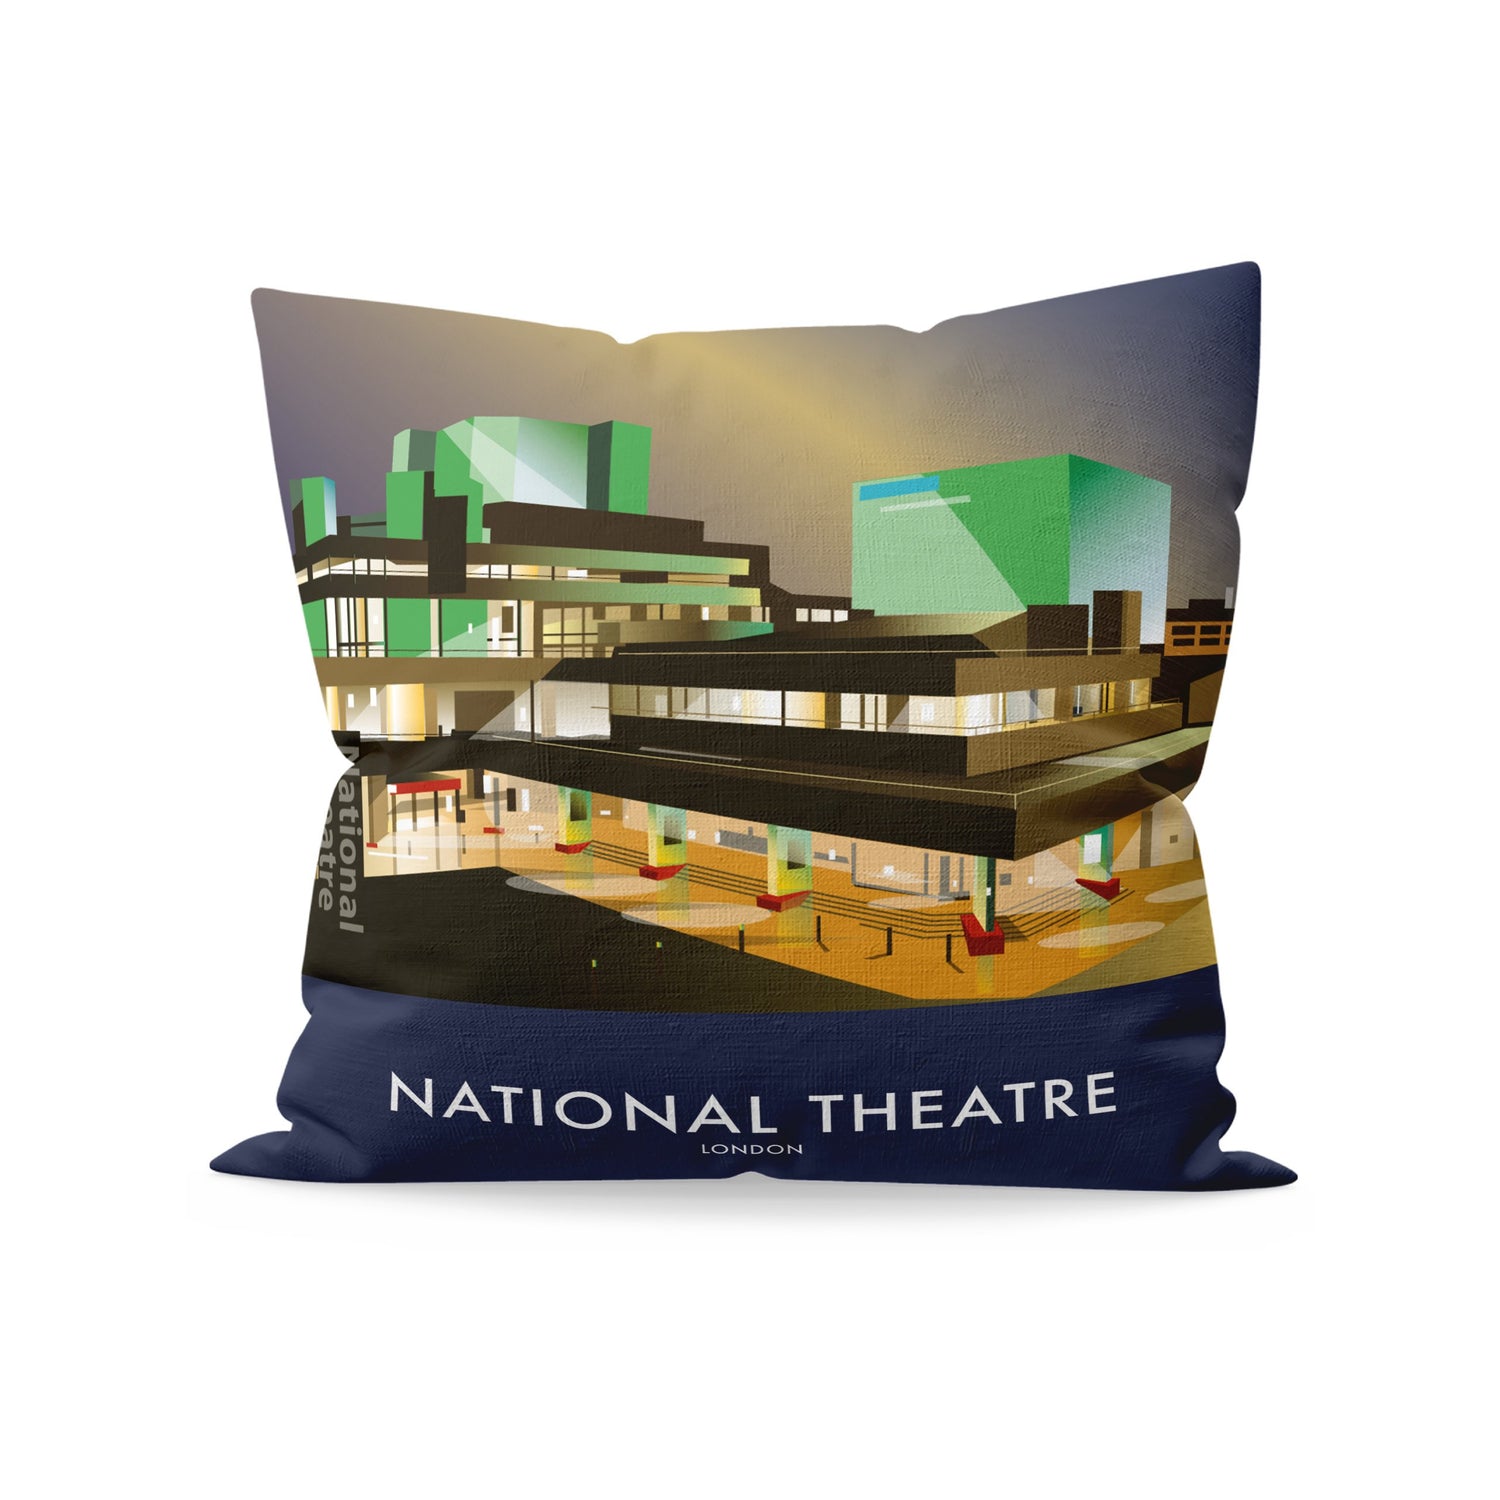 The National Theatre, London Fibre Filled Cushion